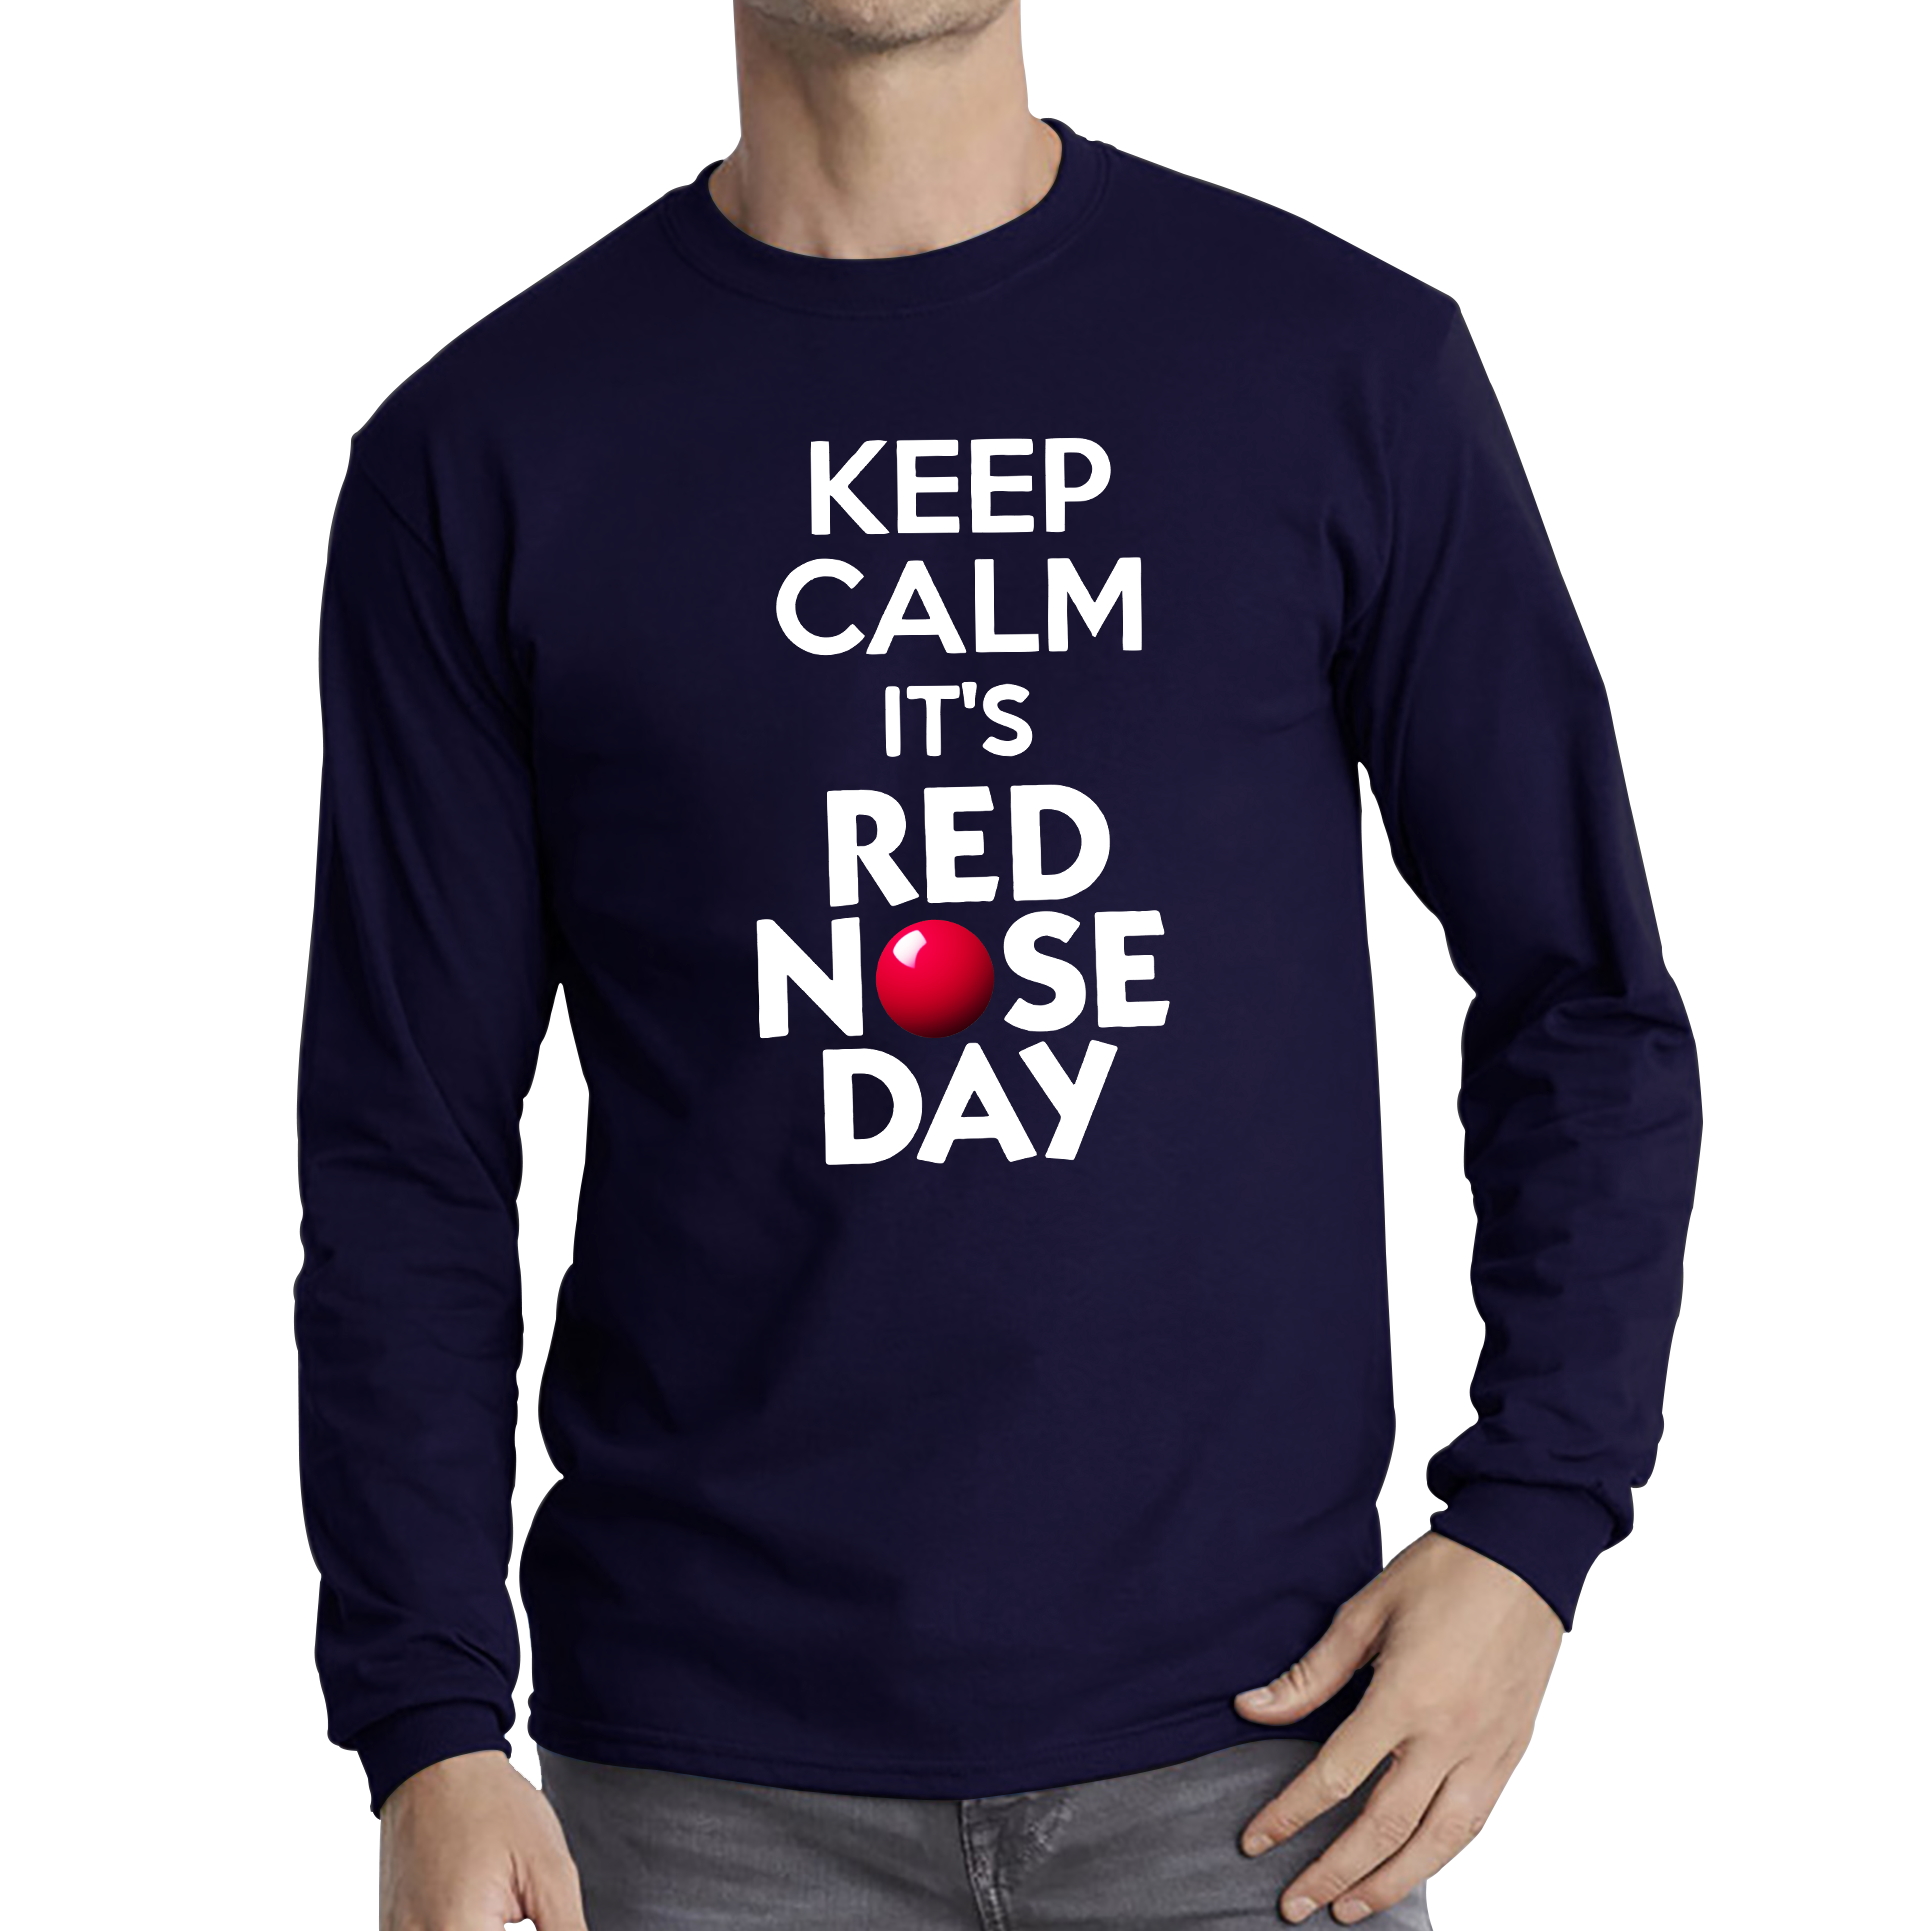 Keep Calm Its Red Nose Day Adult Long Sleeve T Shirt. 50% Goes To Charity